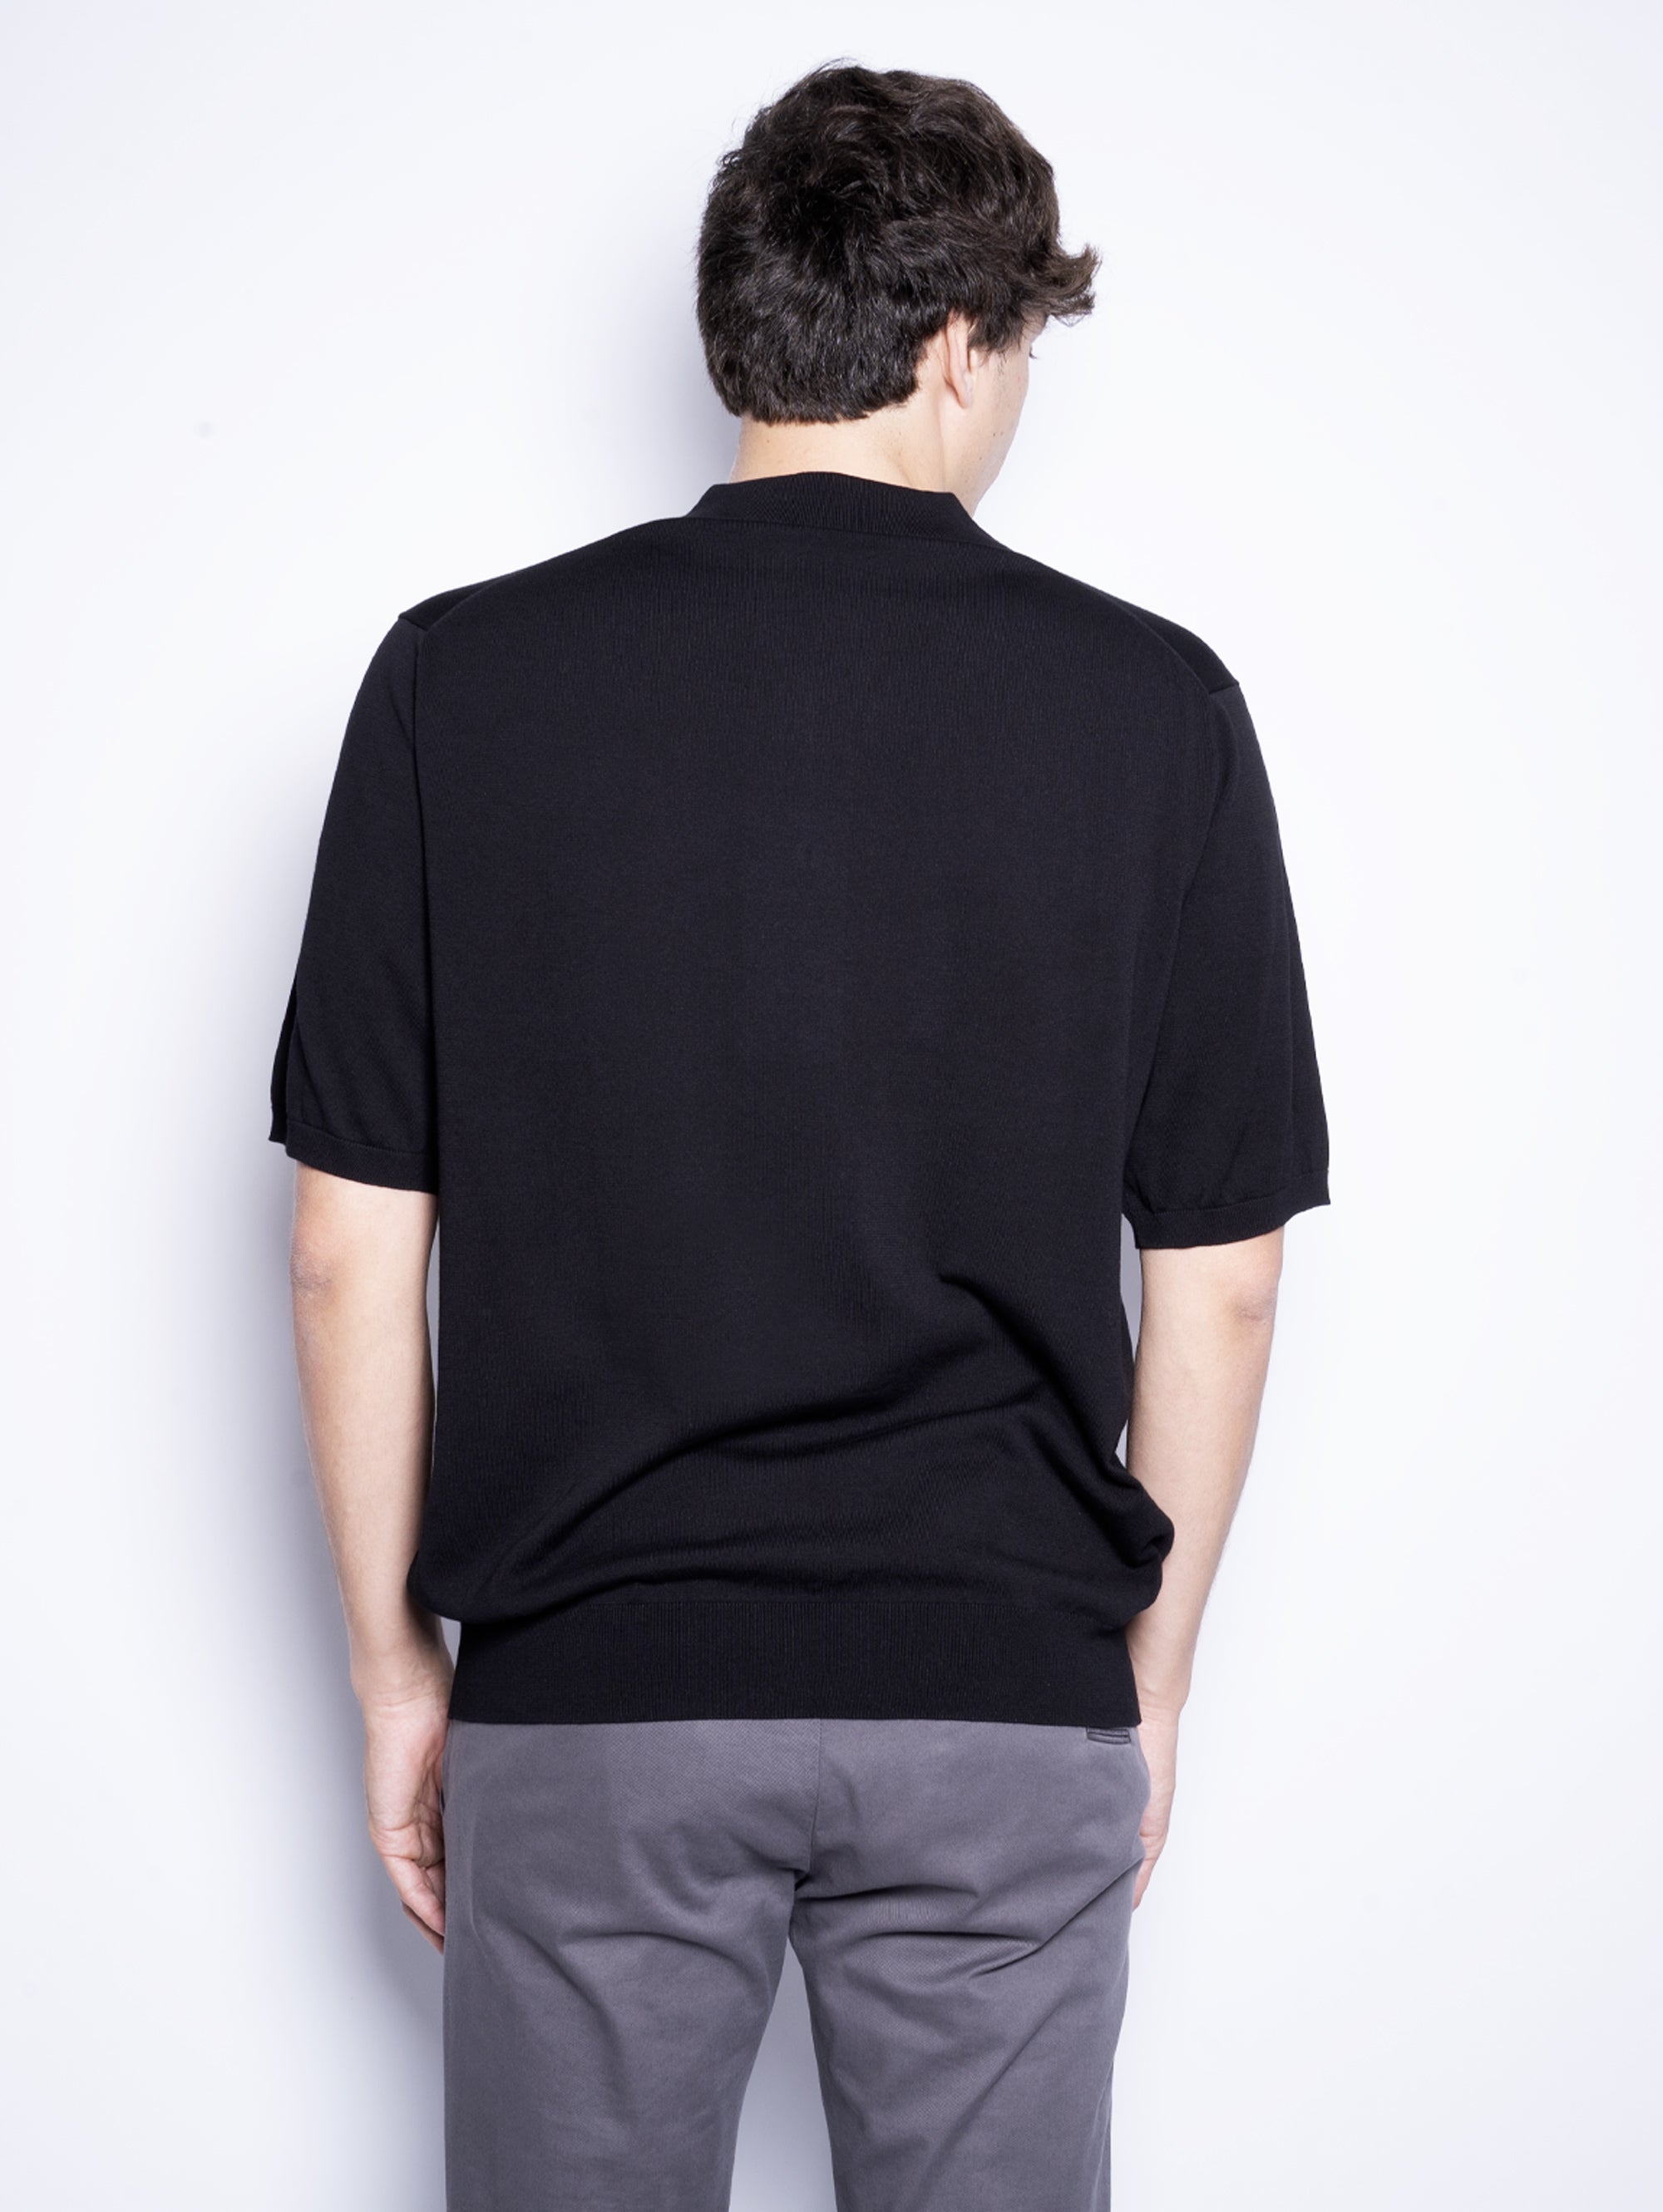 Polo shirt in black extrafine cotton